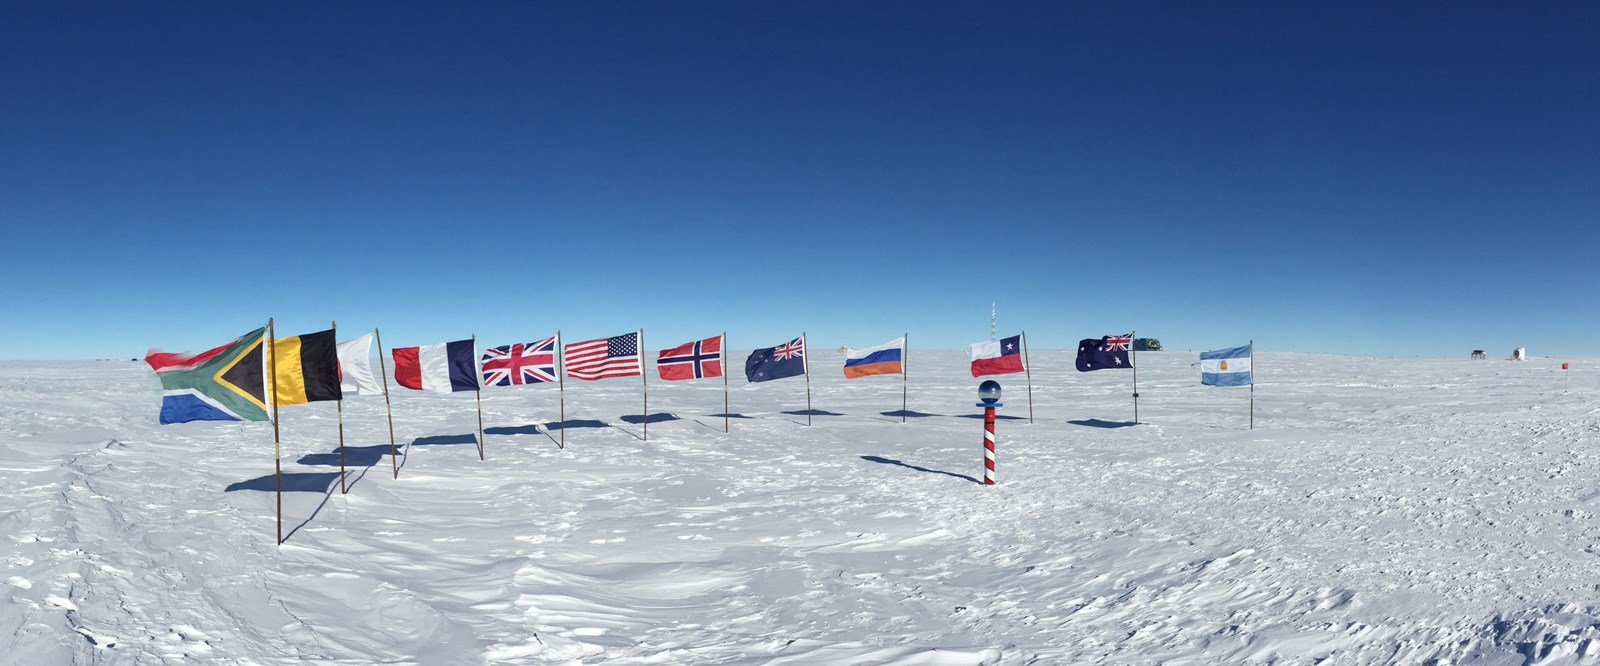 10 incredible facts about life at the South pole